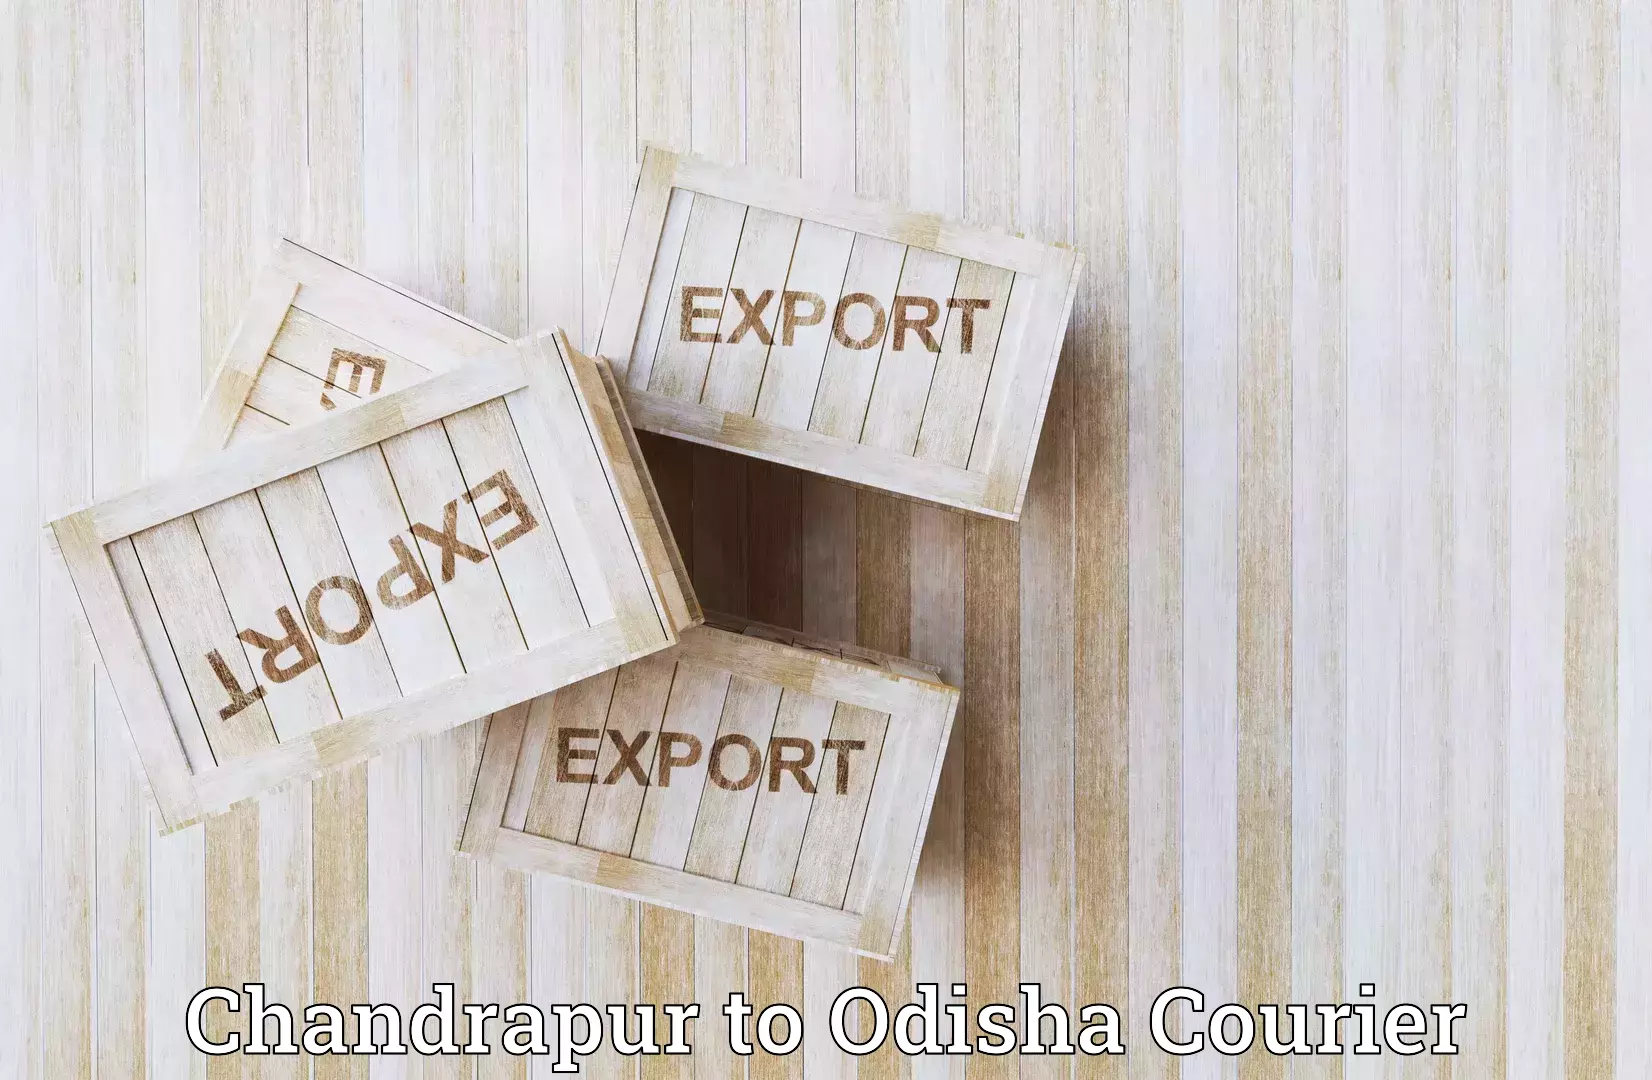 Ocean freight courier Chandrapur to Kendrapara